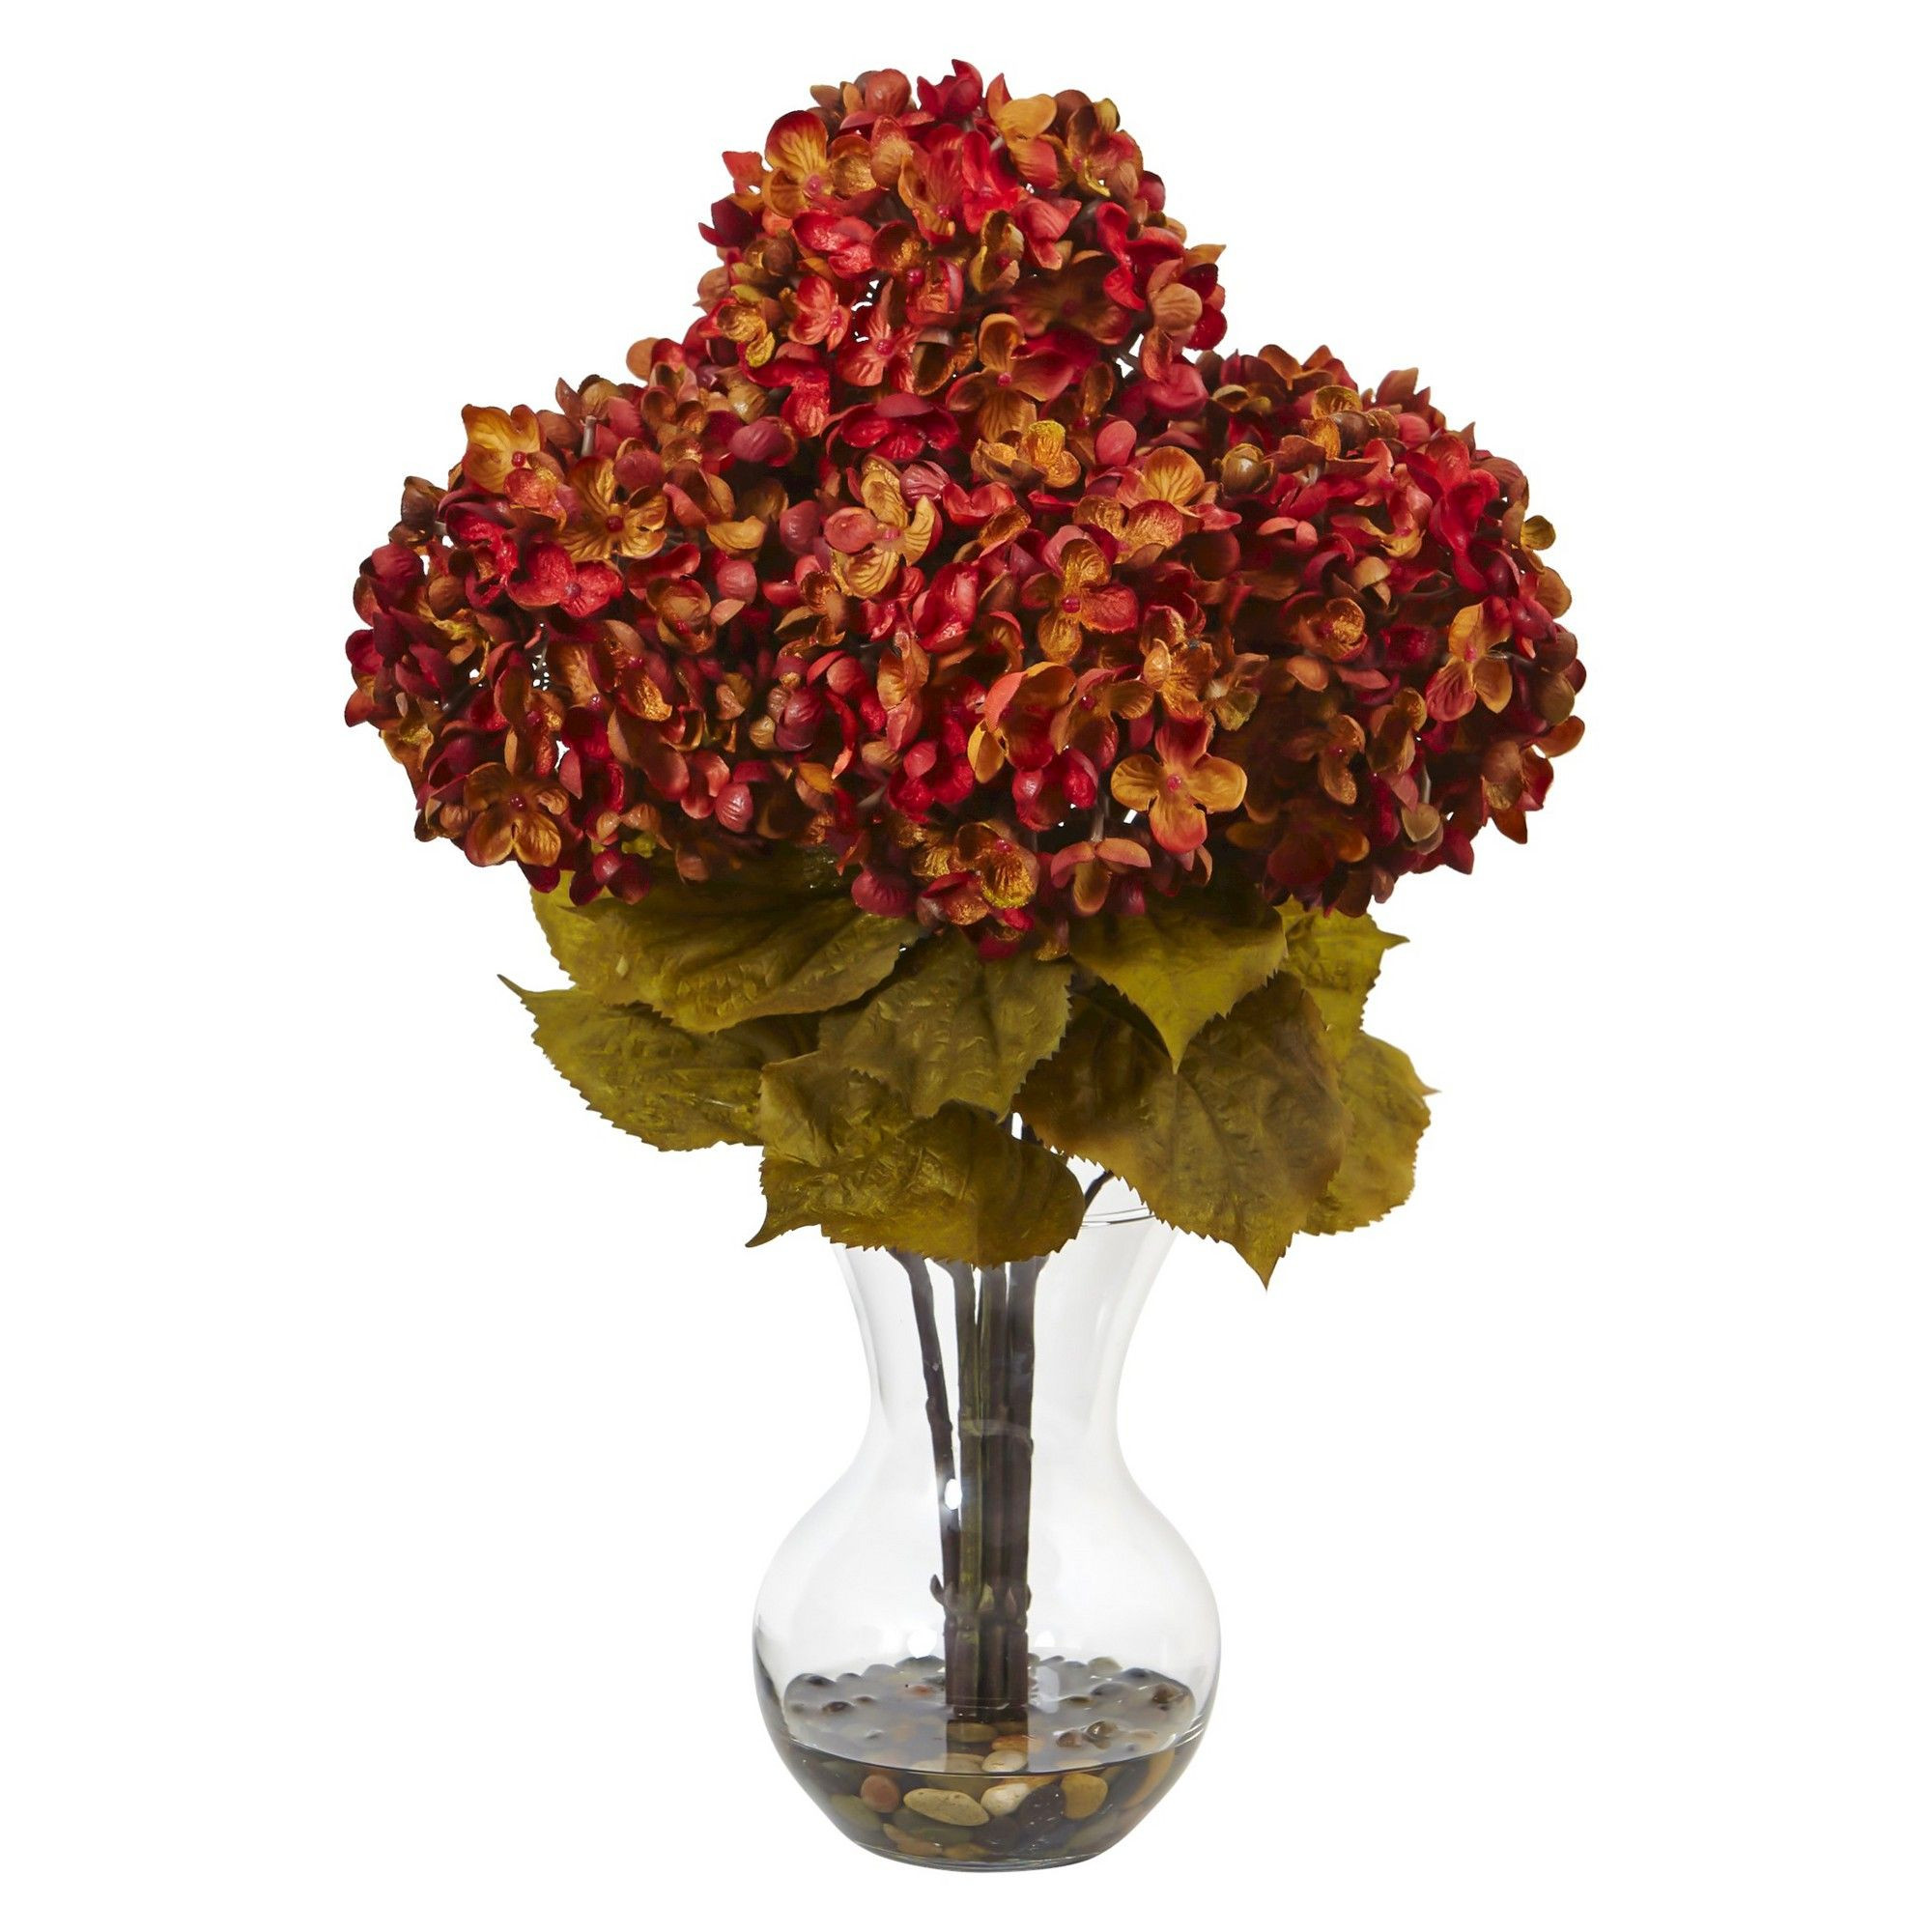 20 attractive Cracked Glass Vases wholesale 2023 free download cracked glass vases wholesale of 18h hydrangea silk flower arrangement with glass vase nearly in 18h hydrangea silk flower arrangement with glass vase nearly natural red